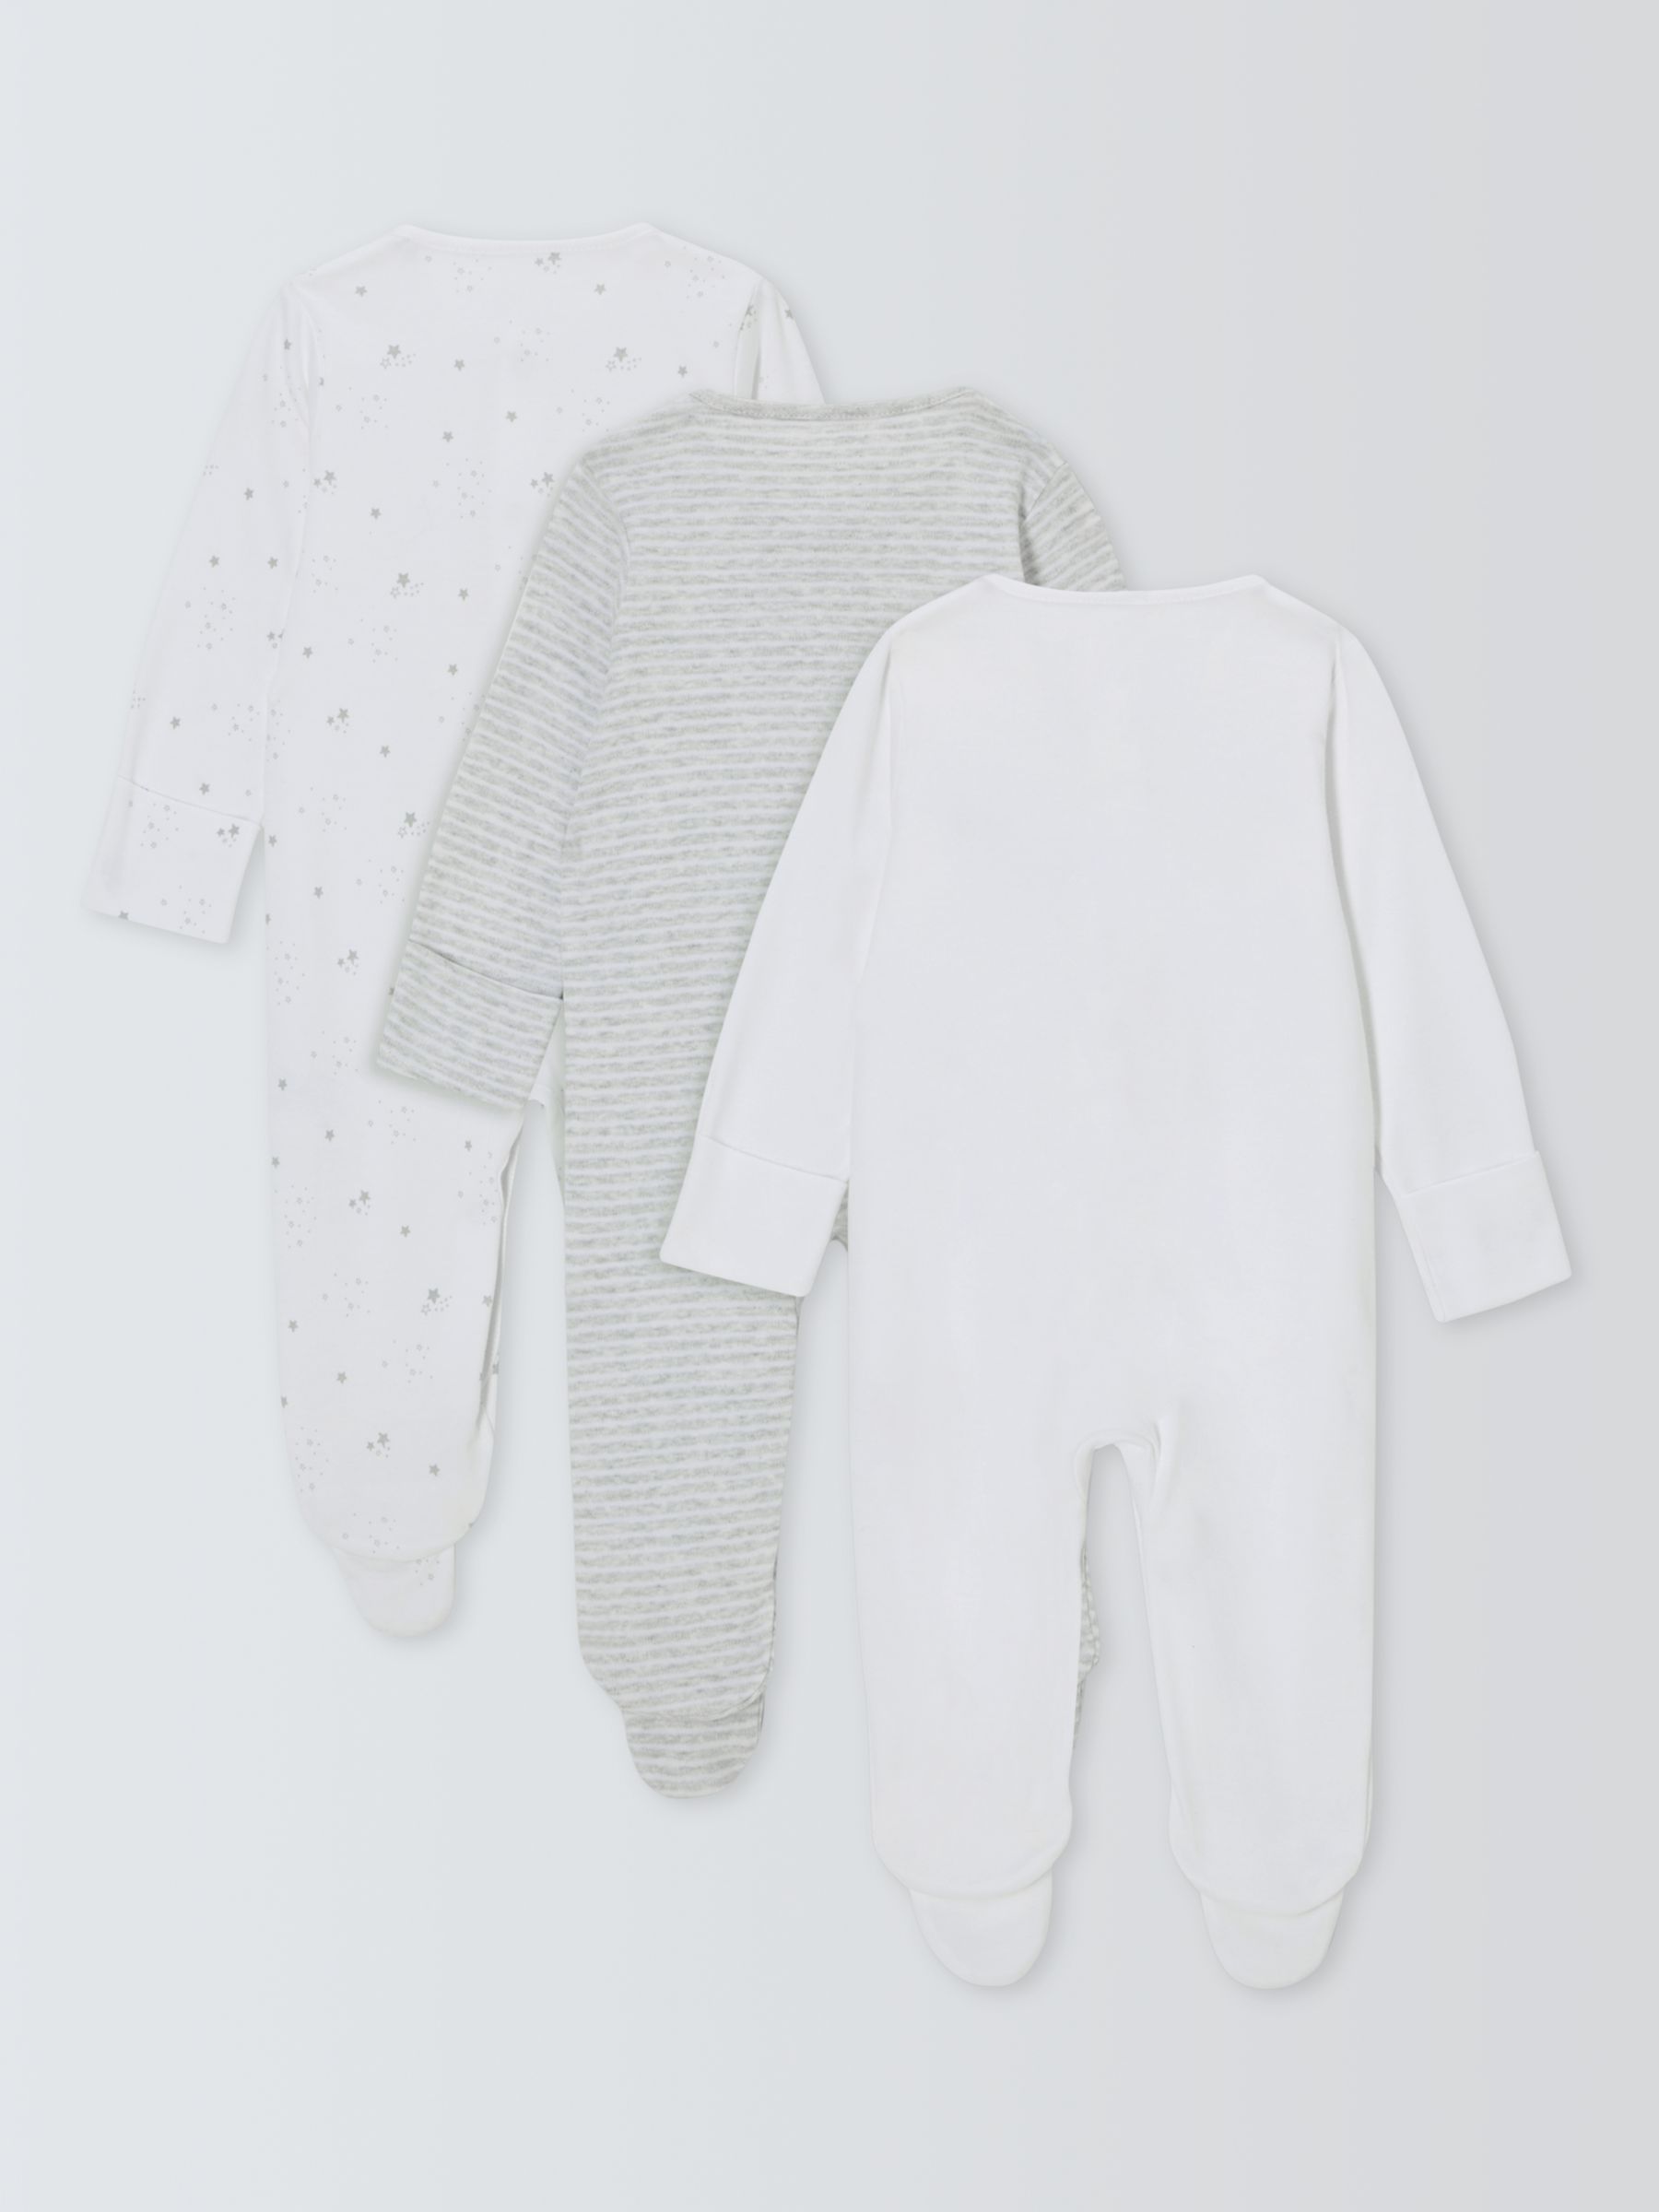 John Lewis Baby Cotton Star Print Sleepsuits, Pack of 3, White, Tiny Baby